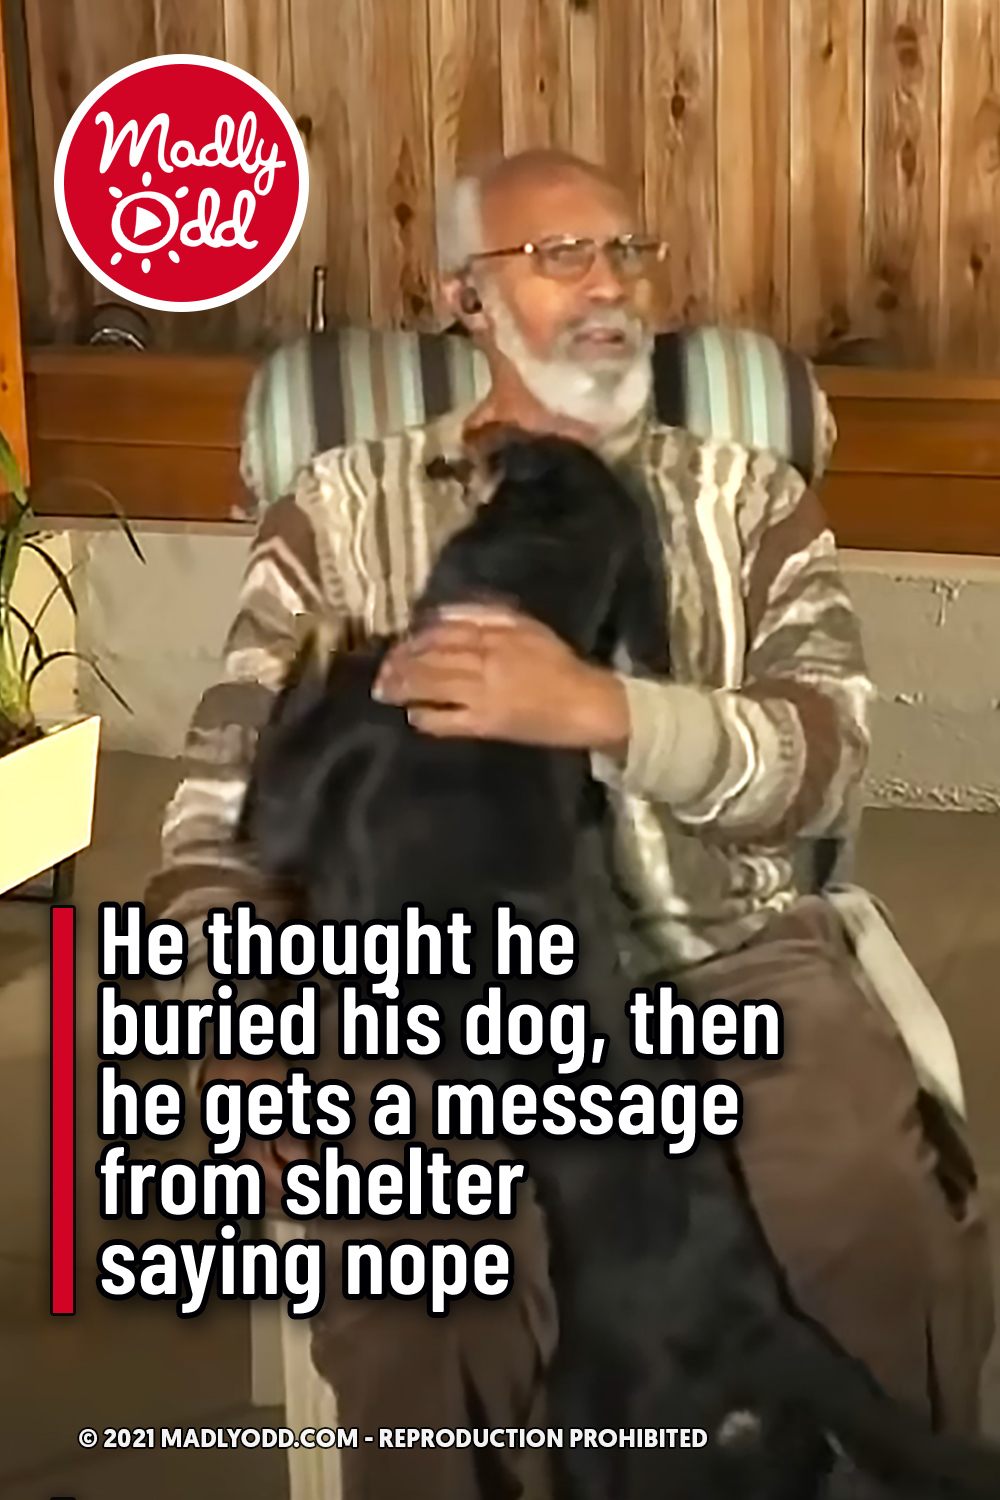 He thought he buried his dog, then he gets a message from shelter saying nope